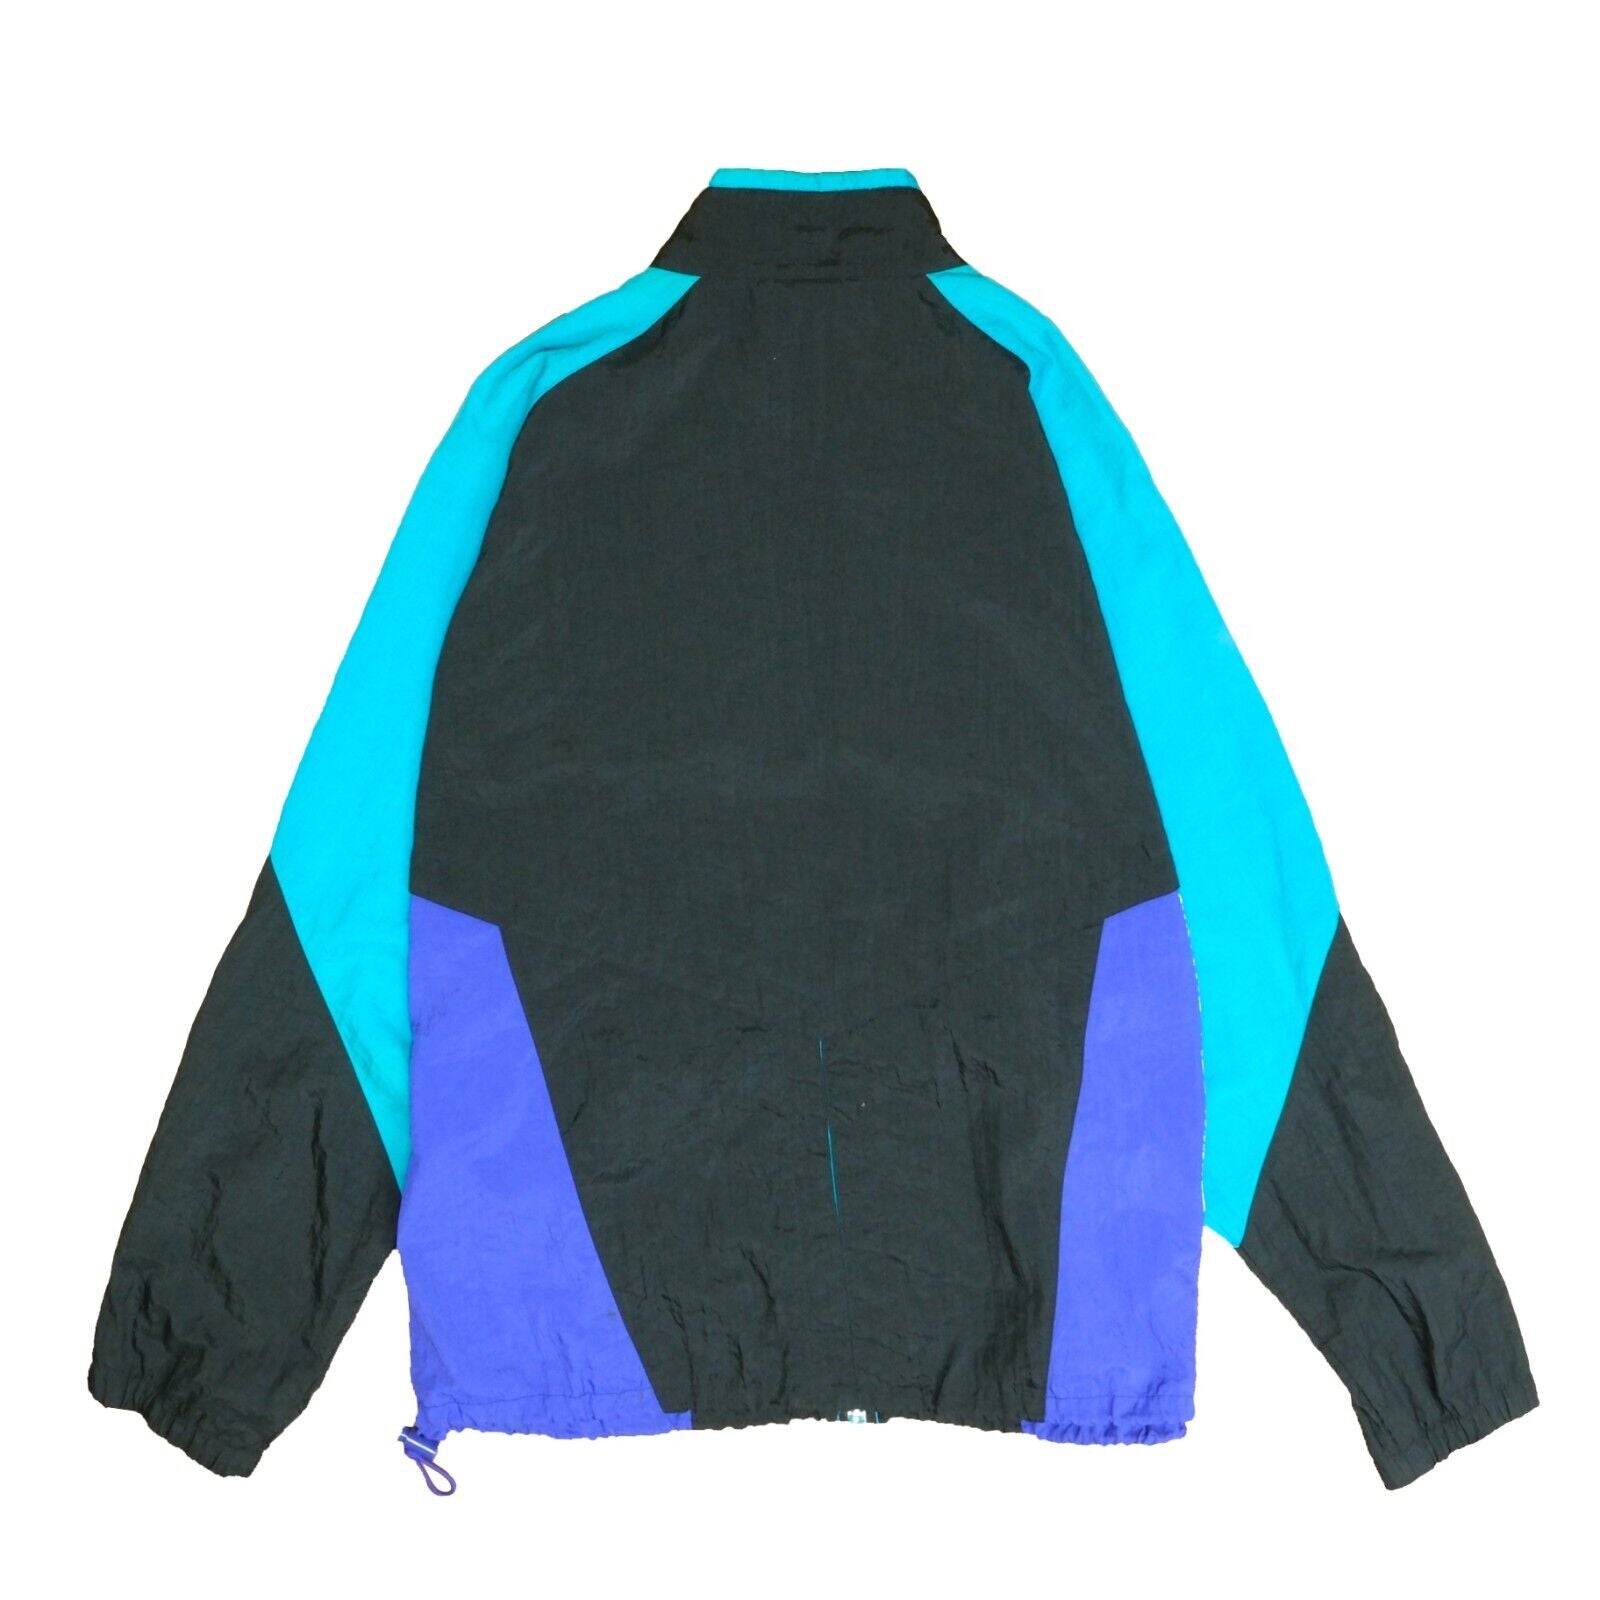 Vintage Nike Windbreaker Jacket Size XL Teal Embroidered Gray Tag